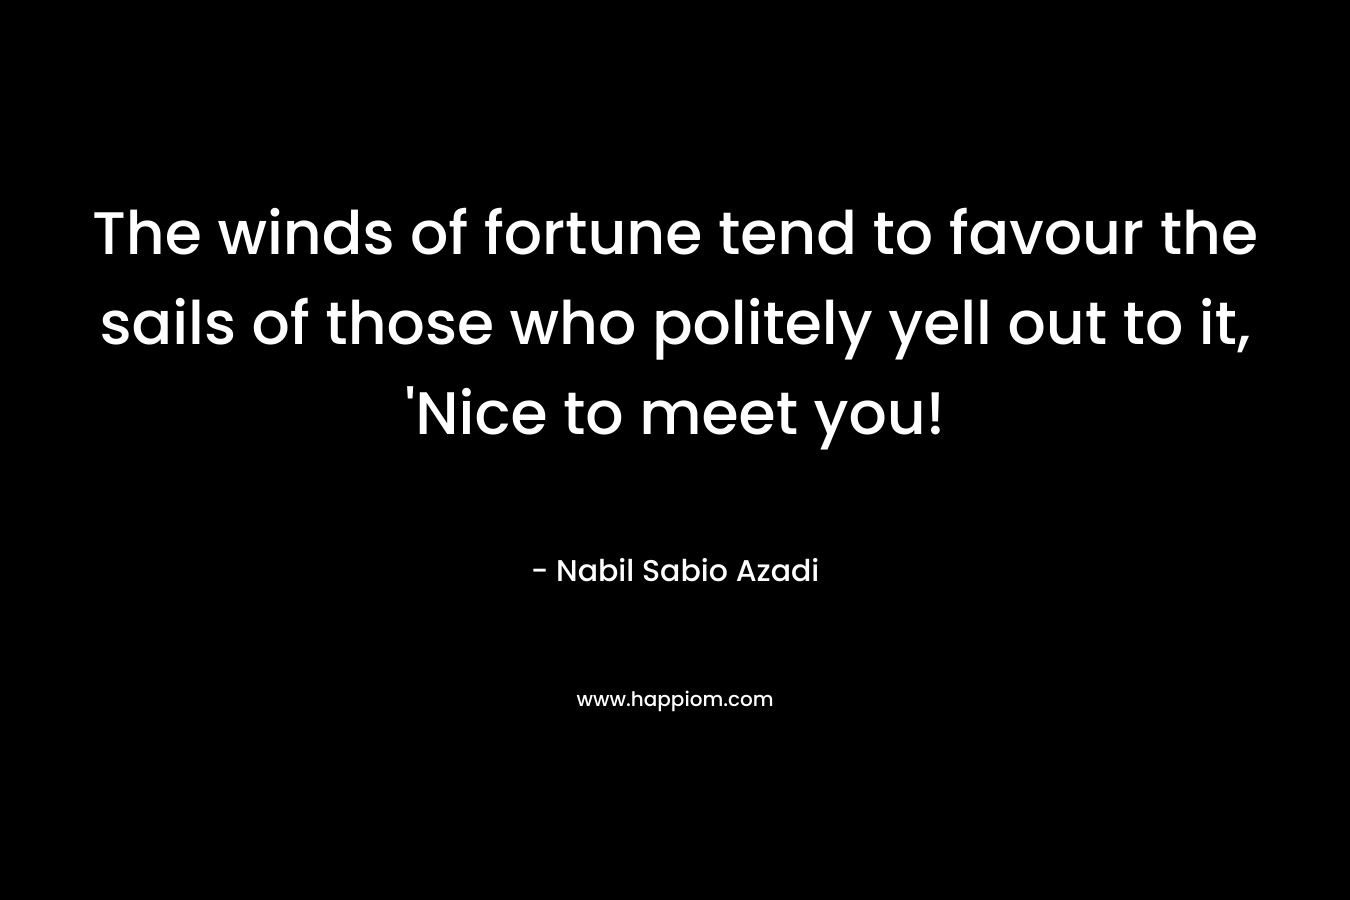 The winds of fortune tend to favour the sails of those who politely yell out to it, 'Nice to meet you!